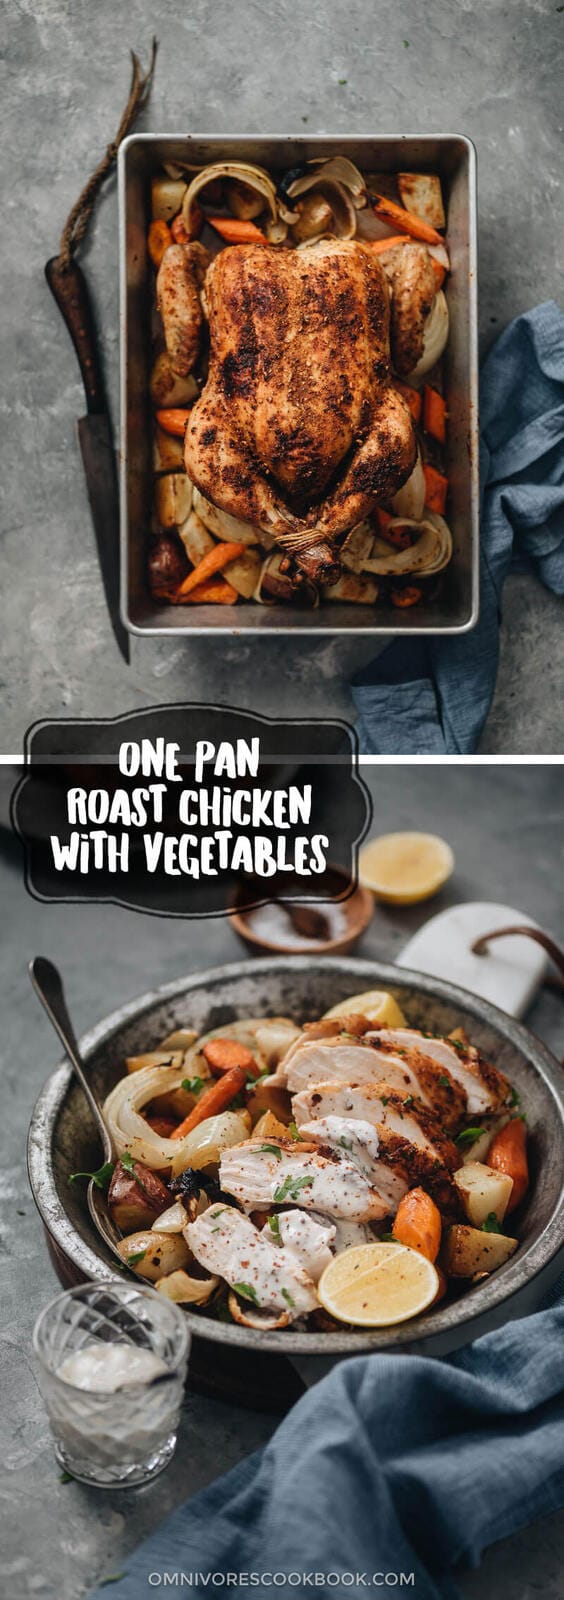 One-Pan Roast Chicken And Vegetables - The chicken is roasted until perfectly charred and juicy inside, while the vegetables are tender and flavorful. It is a great weekend one-pan dinner that takes little effort to prepare. {Gluten Free}